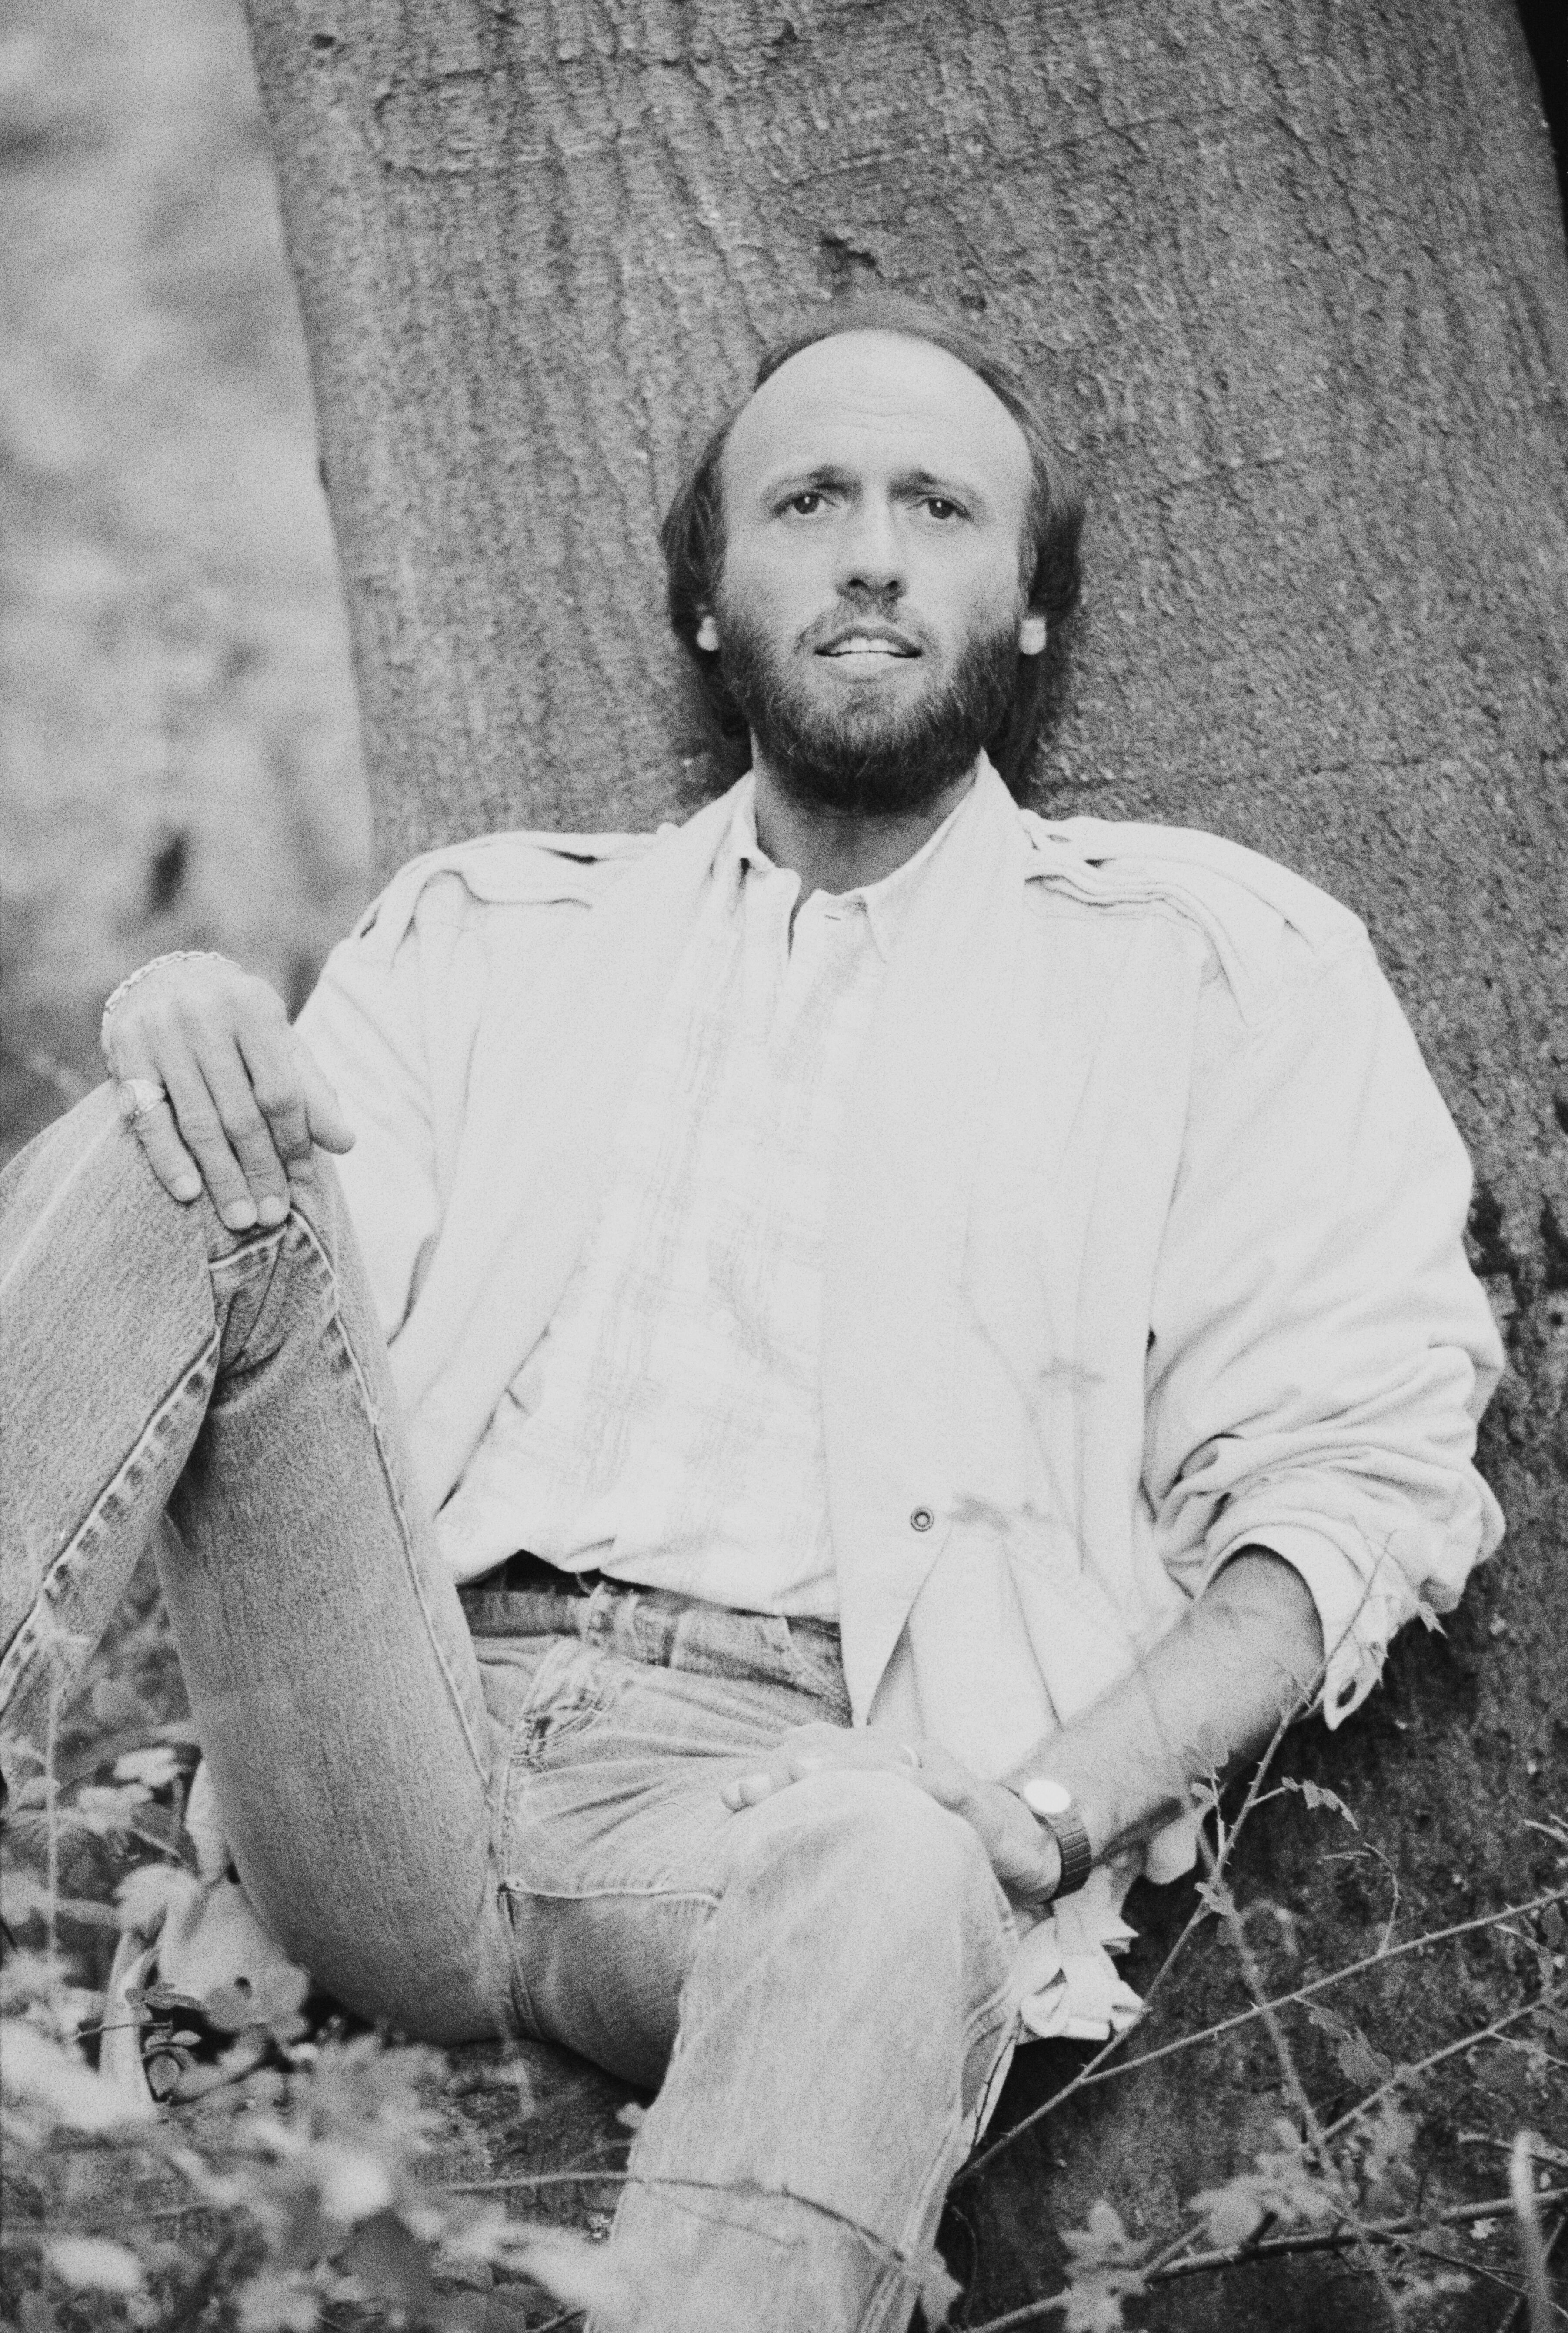 Maurice Gibb (1949 - 2003) of the Bee Gees, 1984. | Source: Getty Images